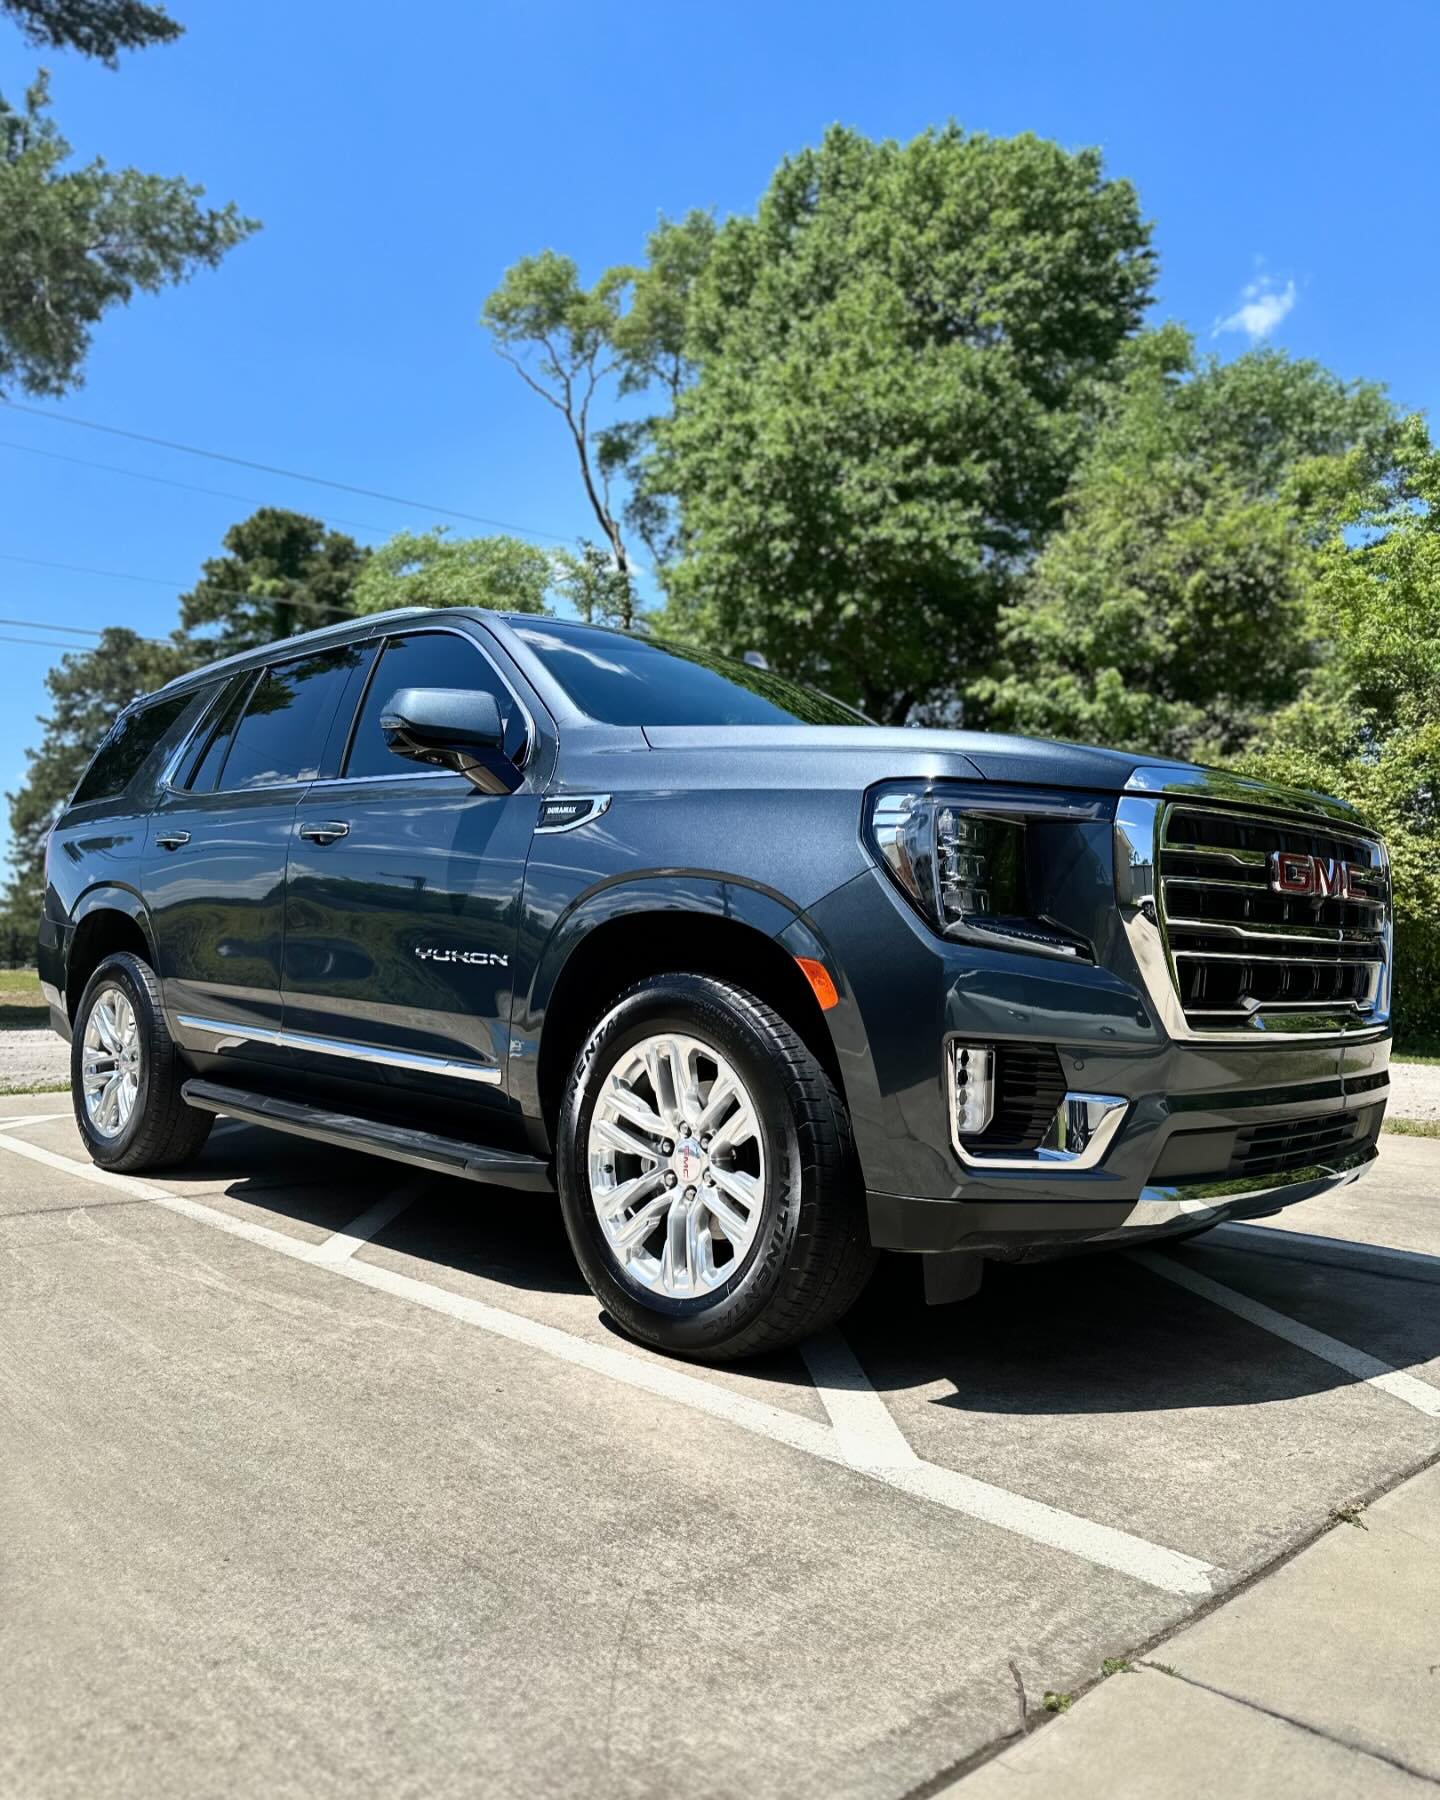 Not the first time for the Herndon&rsquo;s but this time we added a little extra gloss sauce to this beauty. 

  2021 GMC Yukon SLT

✅ ECCD Decon Wash and Clay

✅ ECCD 5 Year Ceramic Coating 

✅ ECCD Windshield Coating

✅ ECCD Sunroof Coated

✅ ECCD 